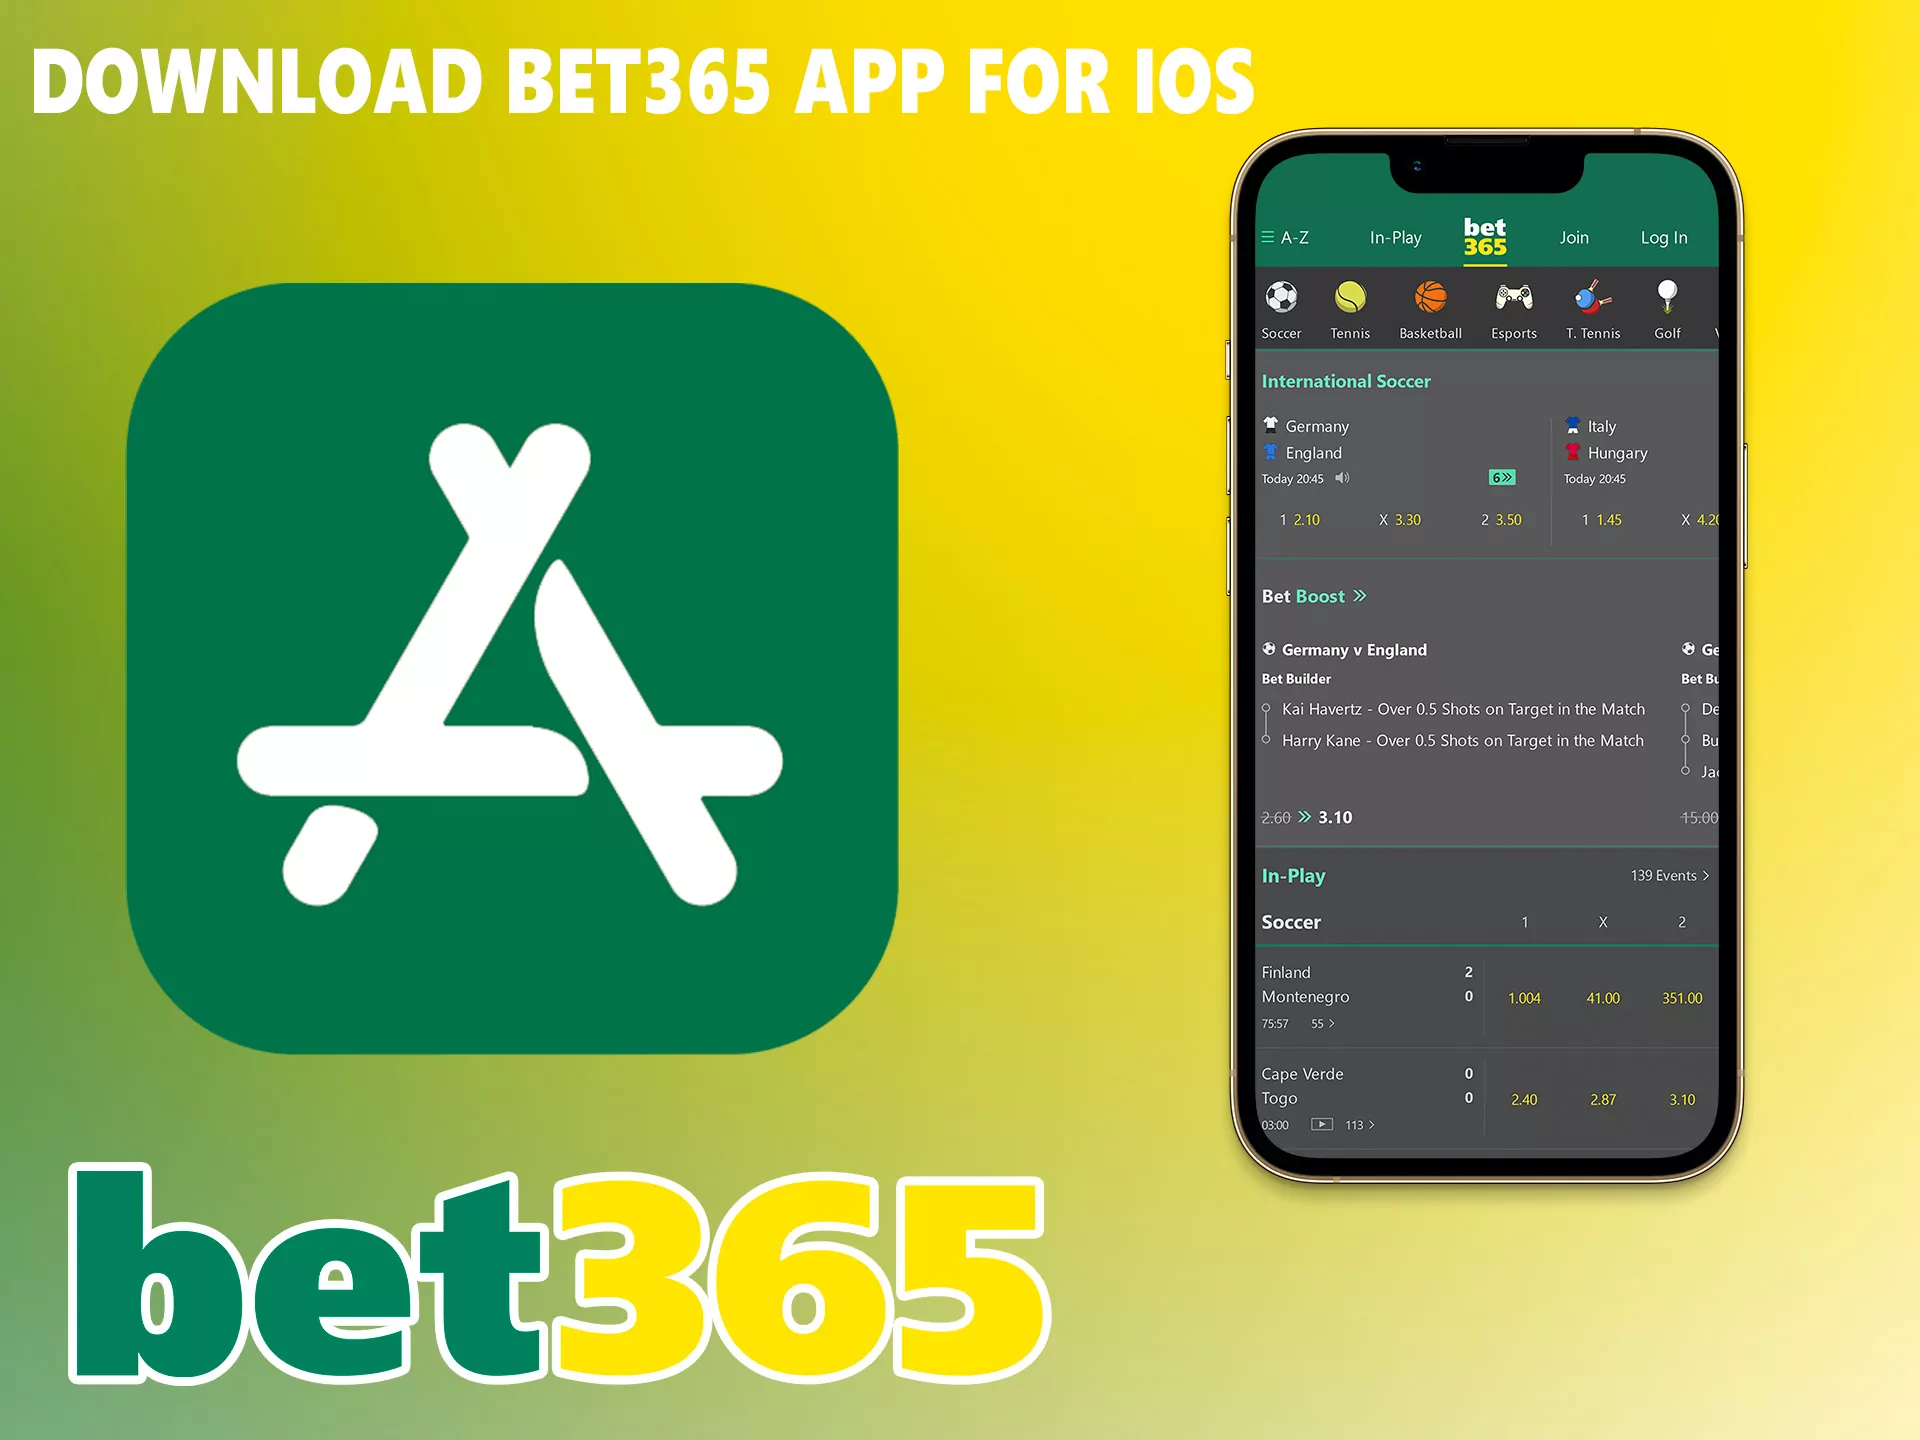 There are no restrictions on betting apps in the App Store so you can easily find and download the Bet365 app.